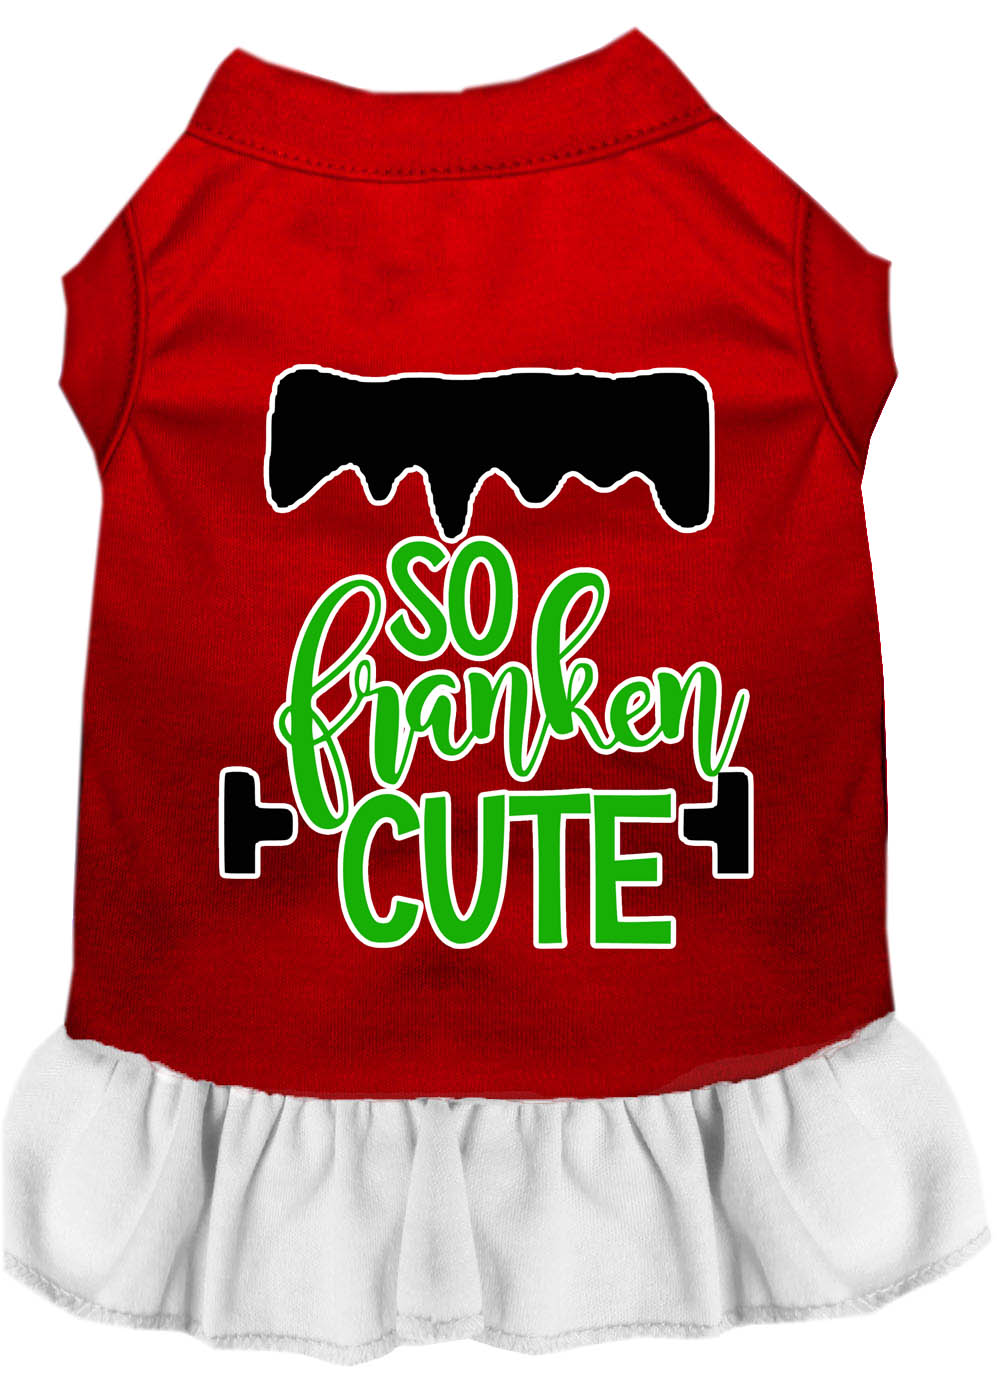 So Franken Cute Screen Print Dog Dress Red with White Med